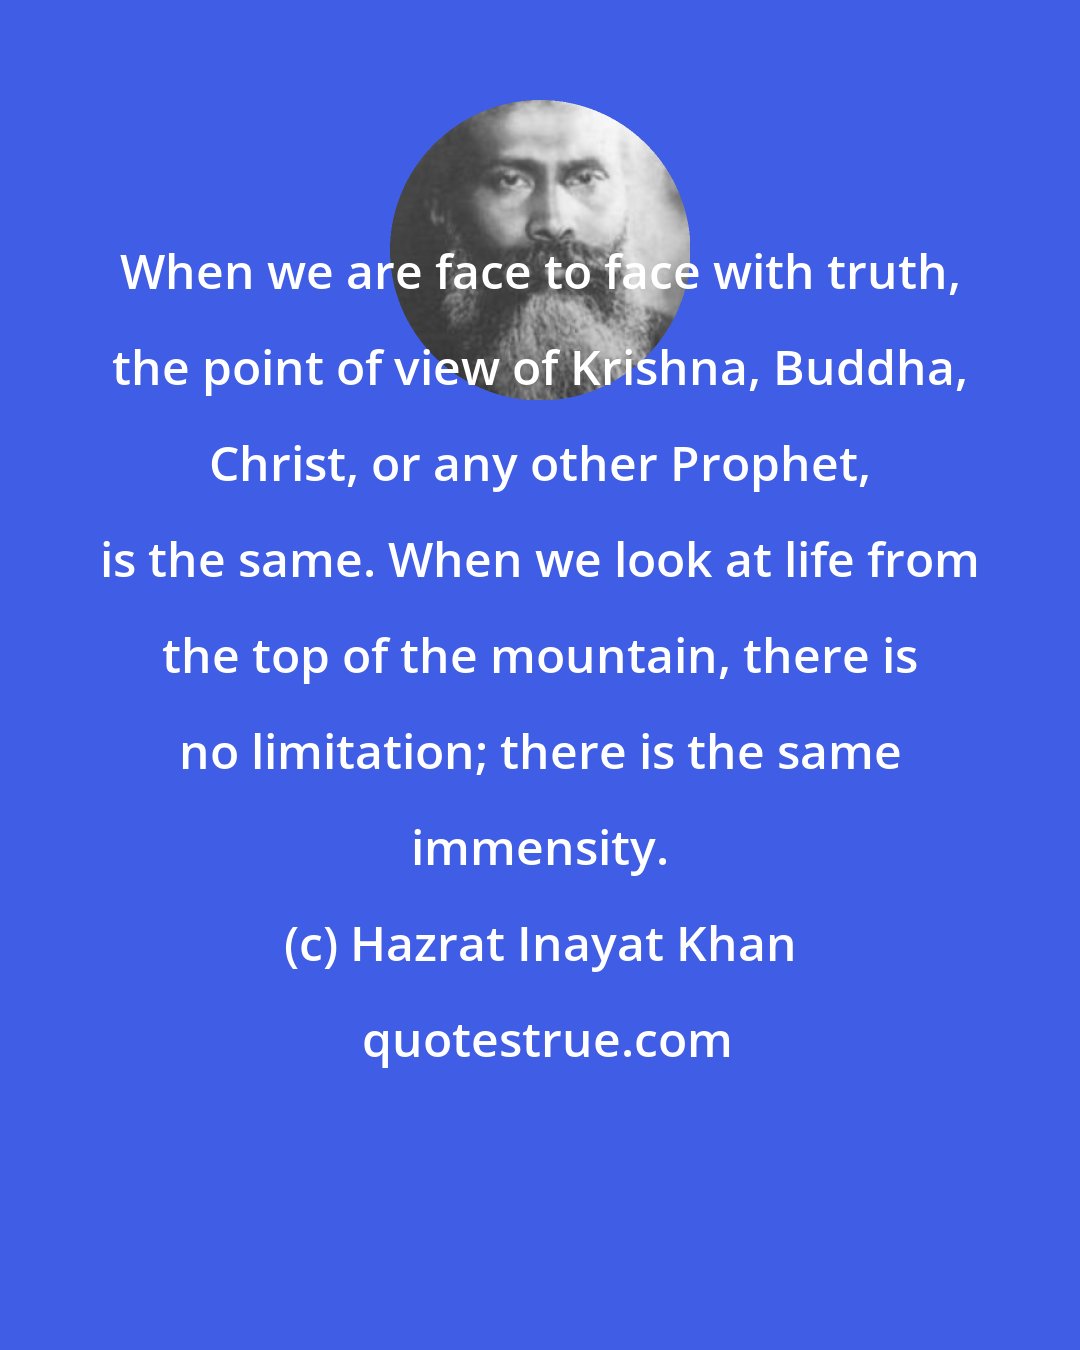 Hazrat Inayat Khan: When we are face to face with truth, the point of view of Krishna, Buddha, Christ, or any other Prophet, is the same. When we look at life from the top of the mountain, there is no limitation; there is the same immensity.